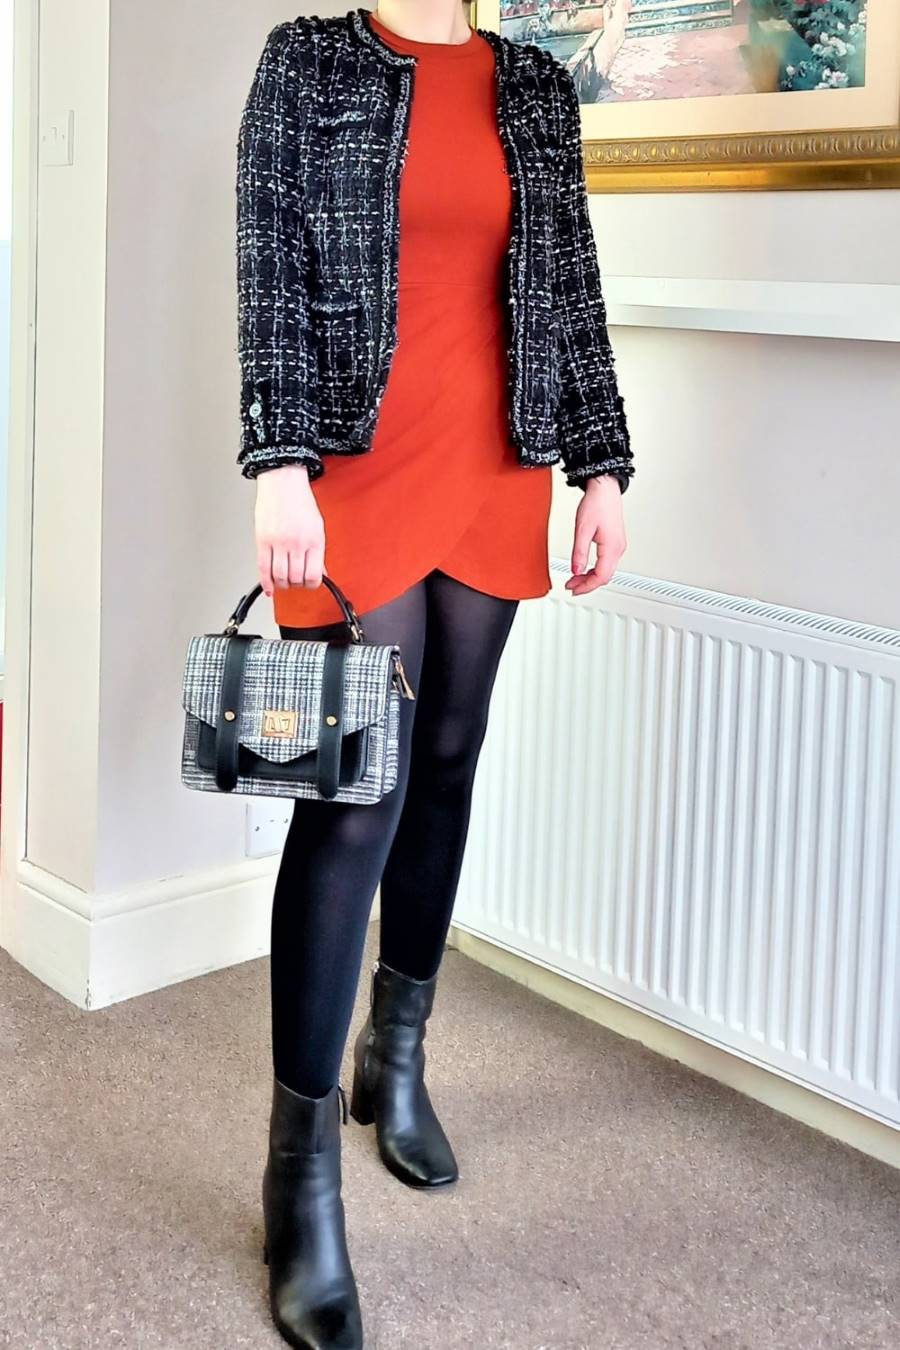 Orange dress and boucle jacket, summer dress for work in winter